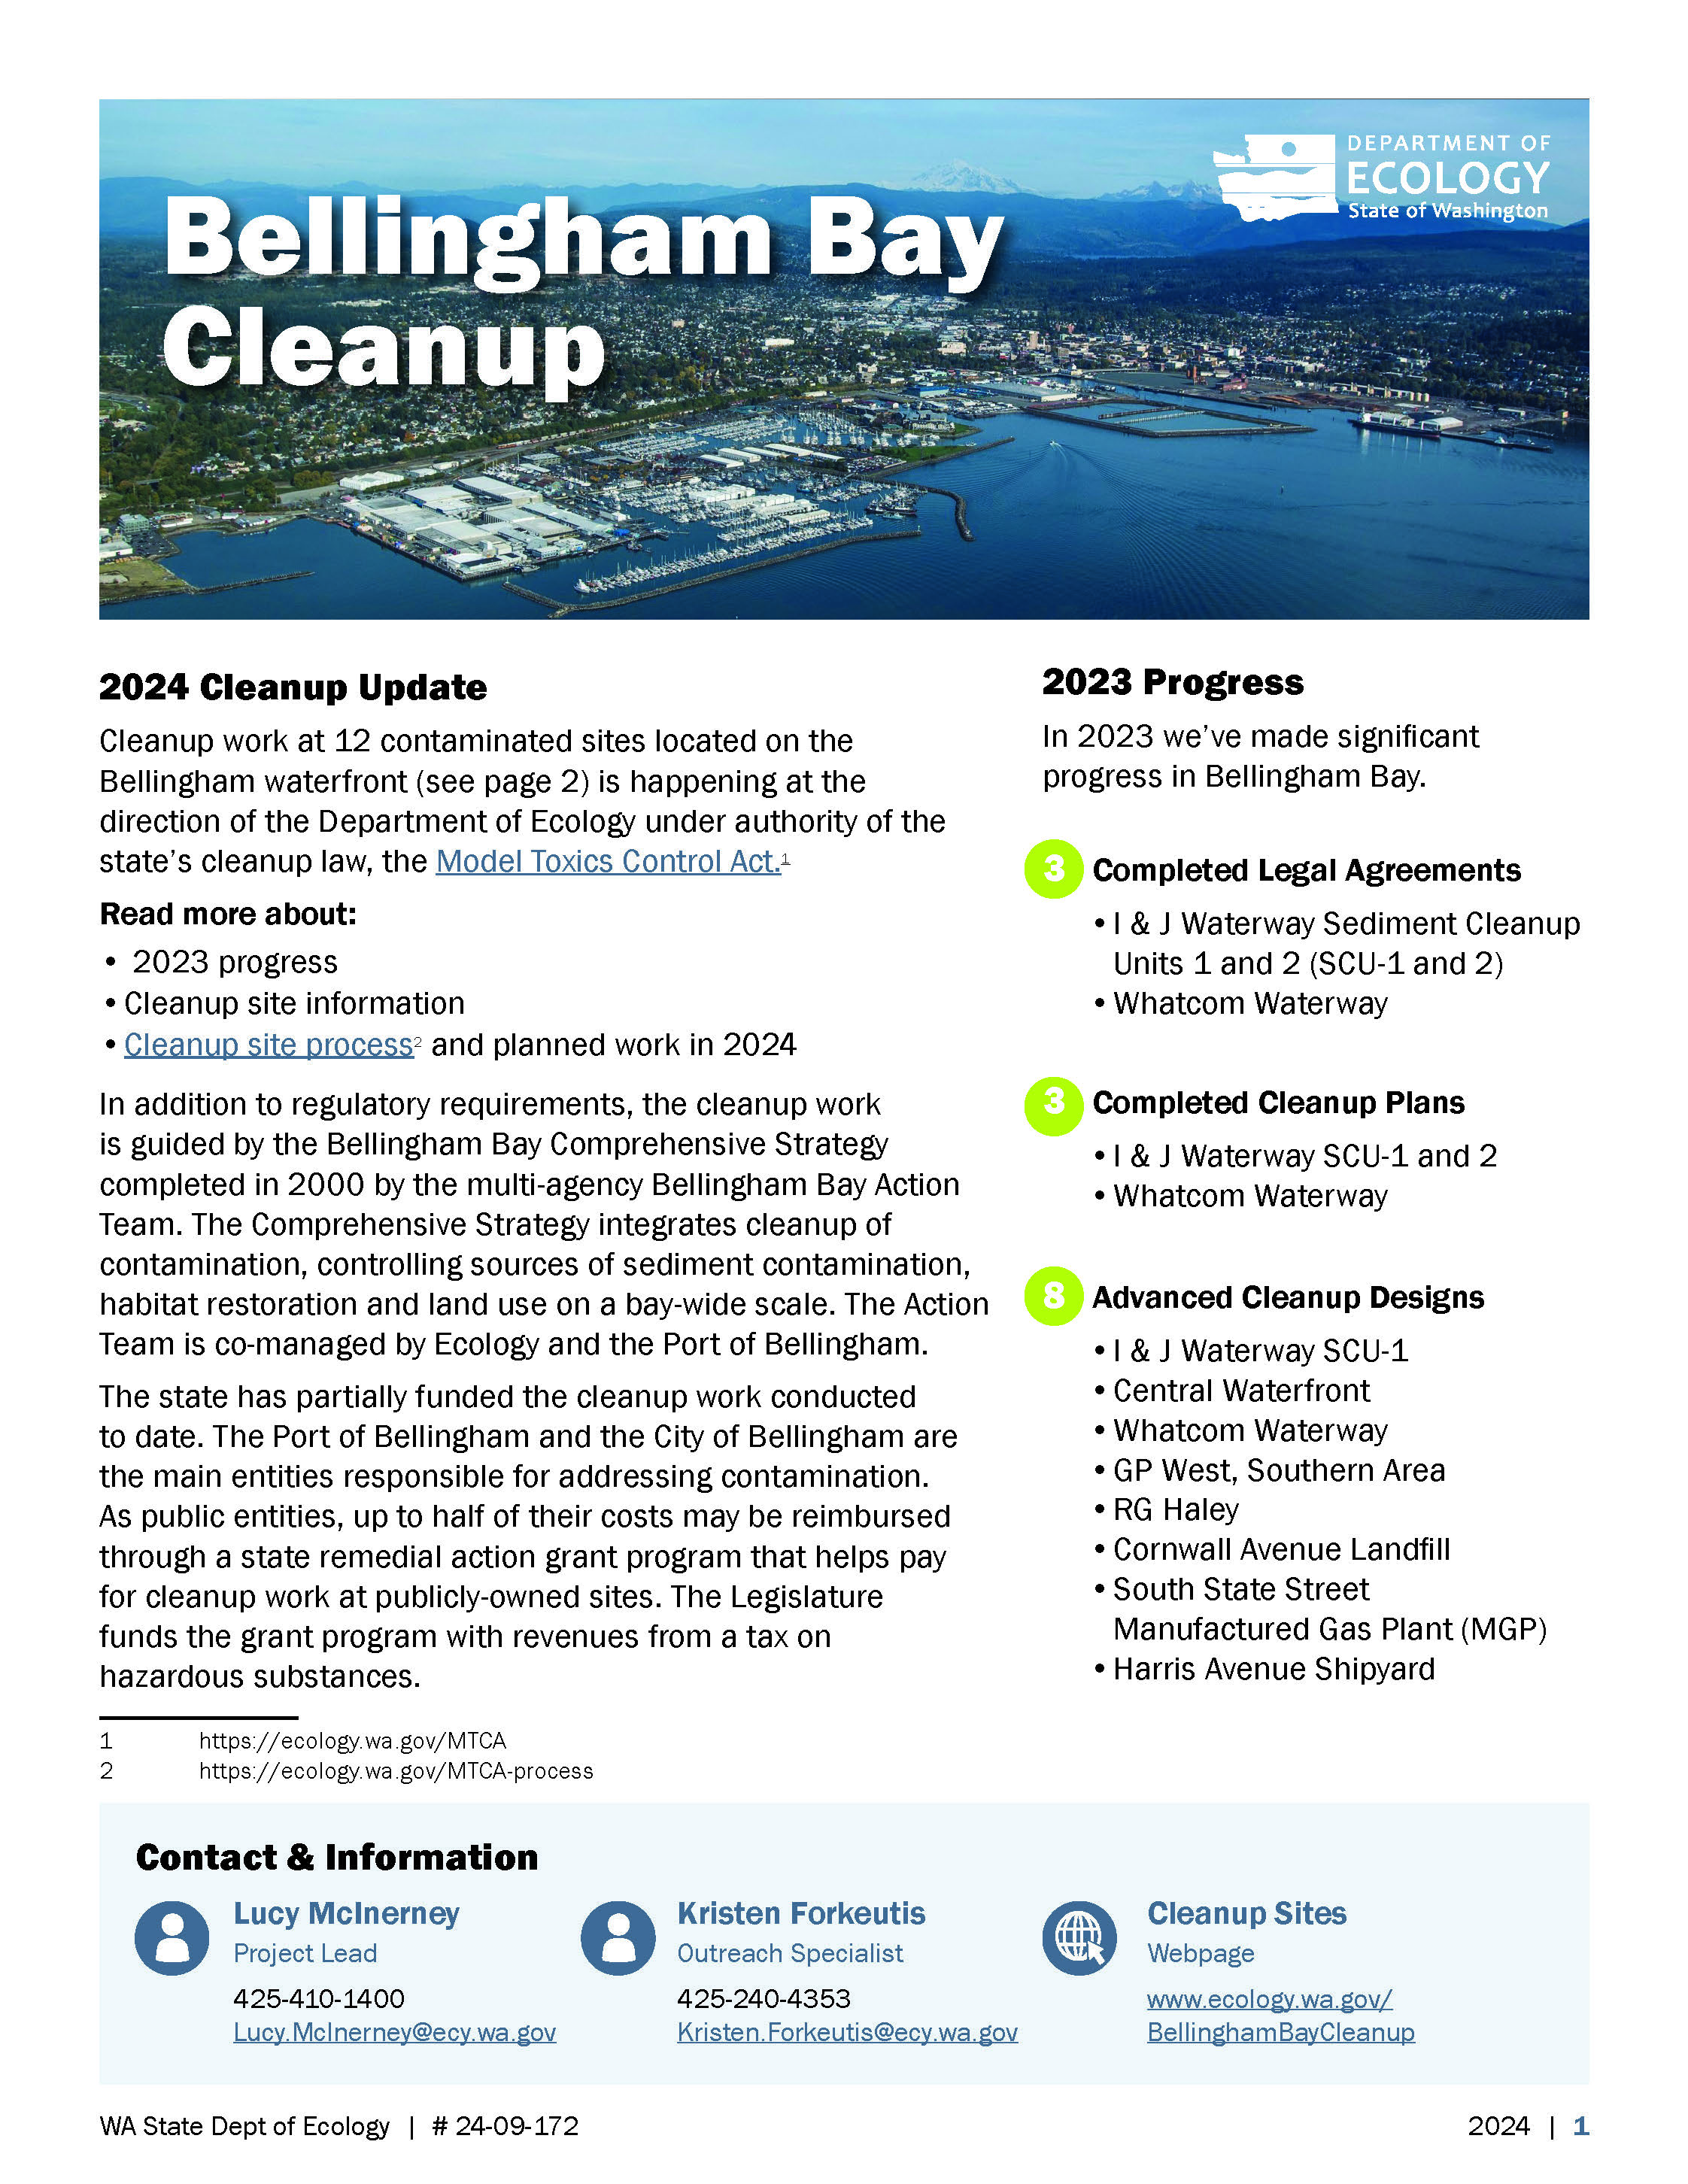 Fact sheet cover page shows aerial view of bay, 2024 cleanup update, 2023 progress